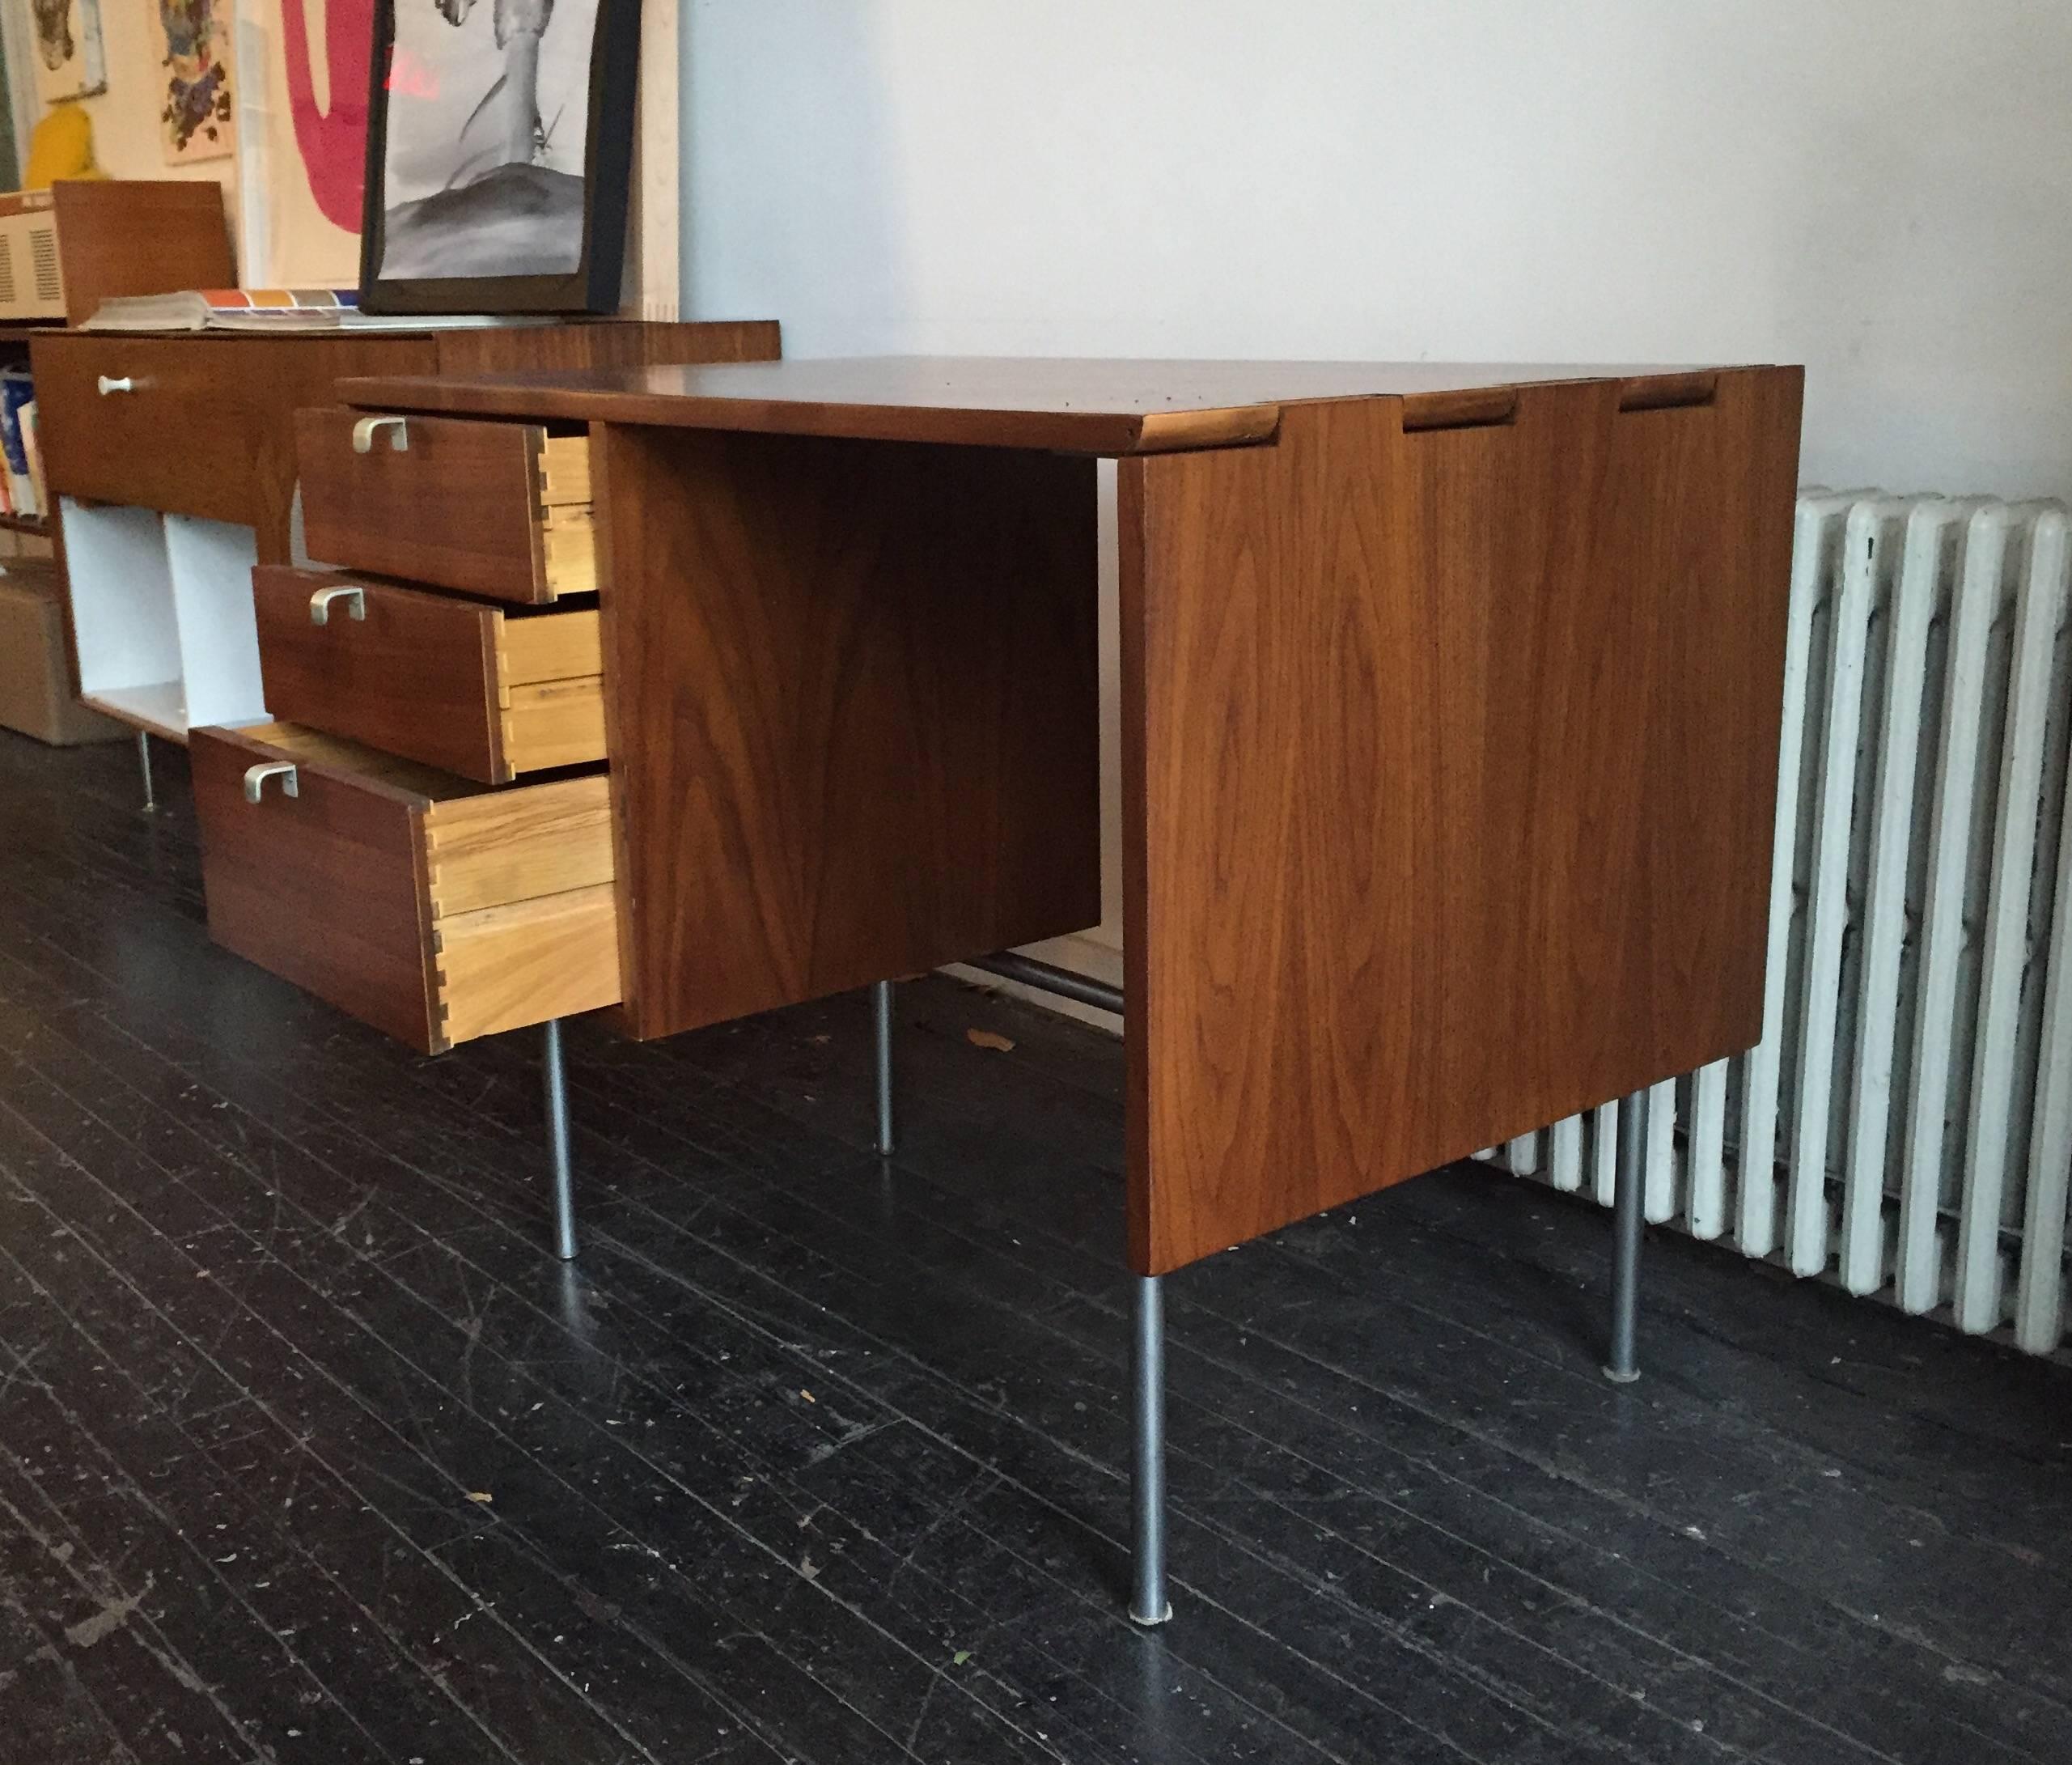 Drop Leaf Desk designed by George Nelson for Herman Miller, 1950ca. Satin chrome legs and J pulls, walnut and stainless steel. 

With the Drop Leaf extended the length of the top is 58 3/16 in.